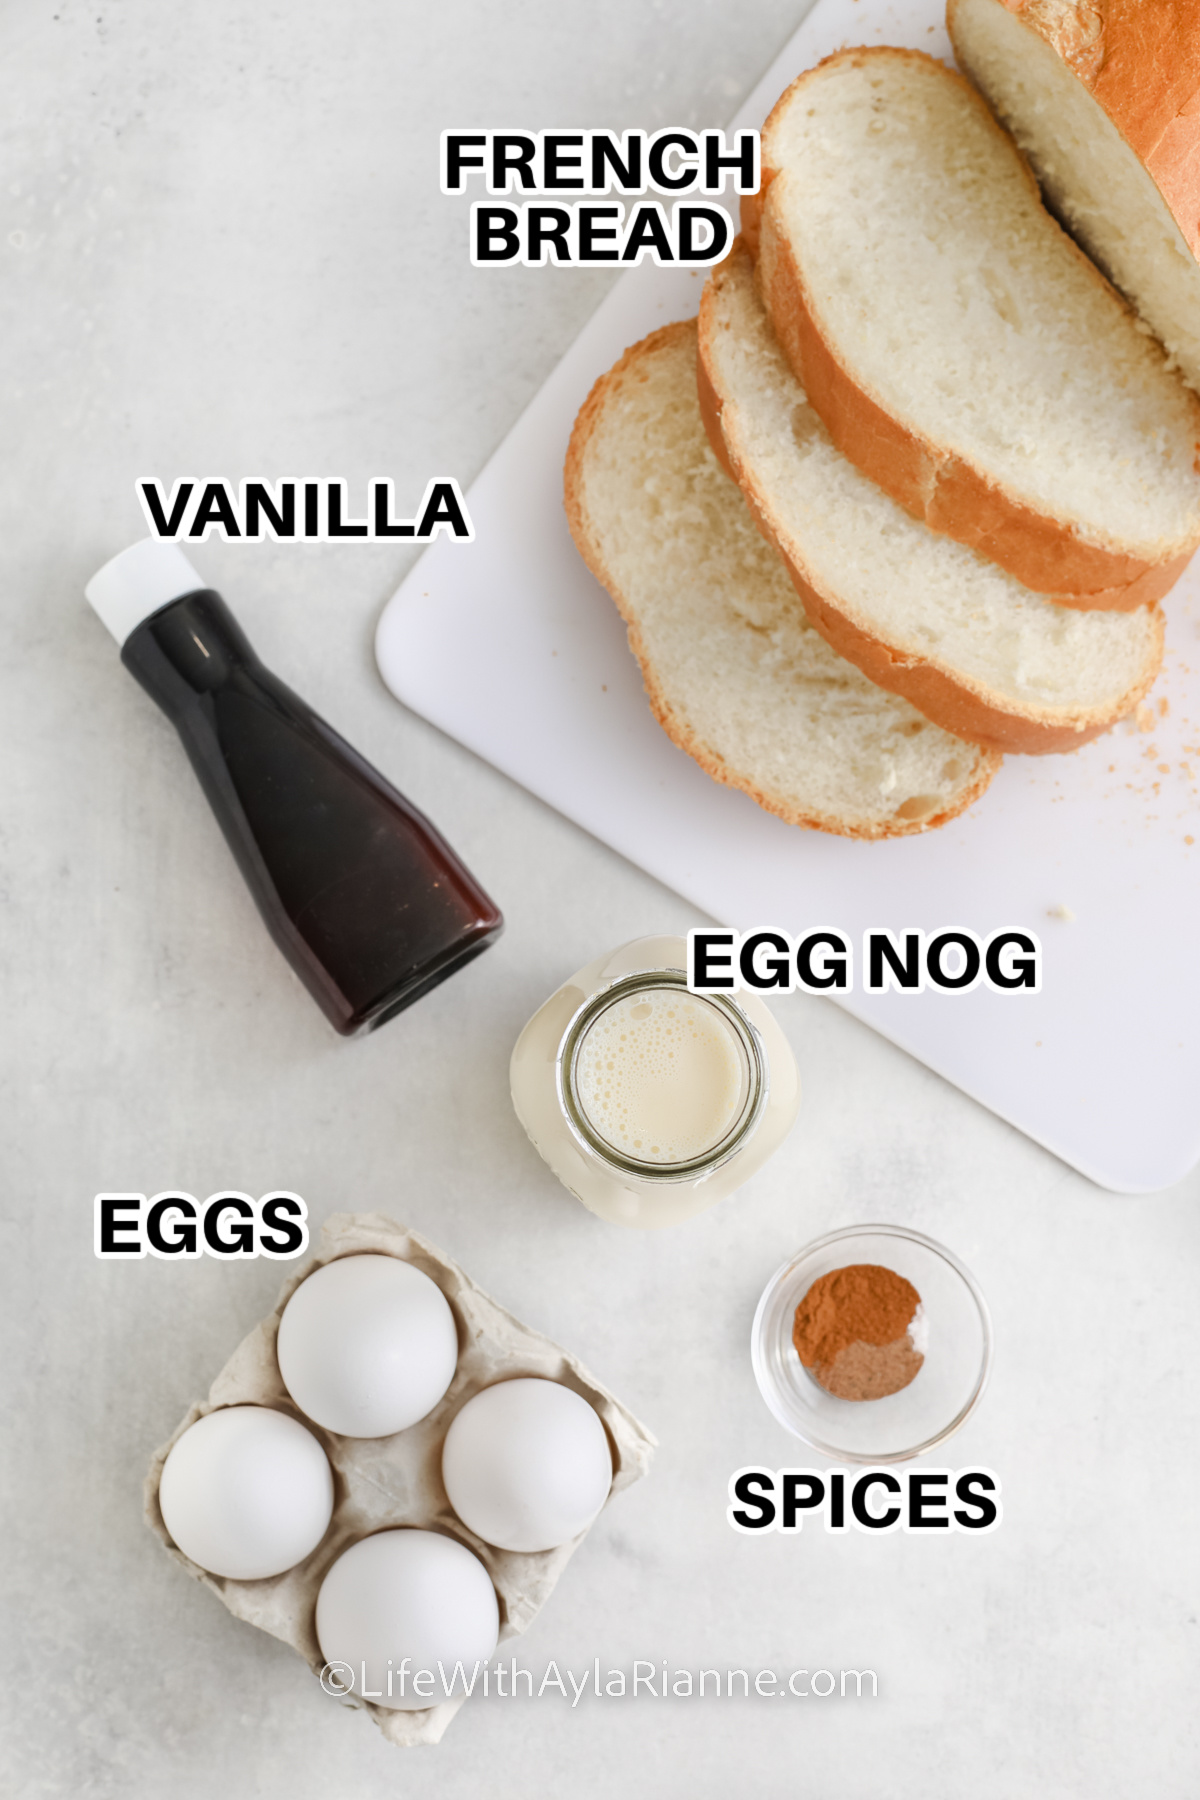 ingredients to make Eggnog French Toast including French bread, vanilla, eggs, egg nog, and spices